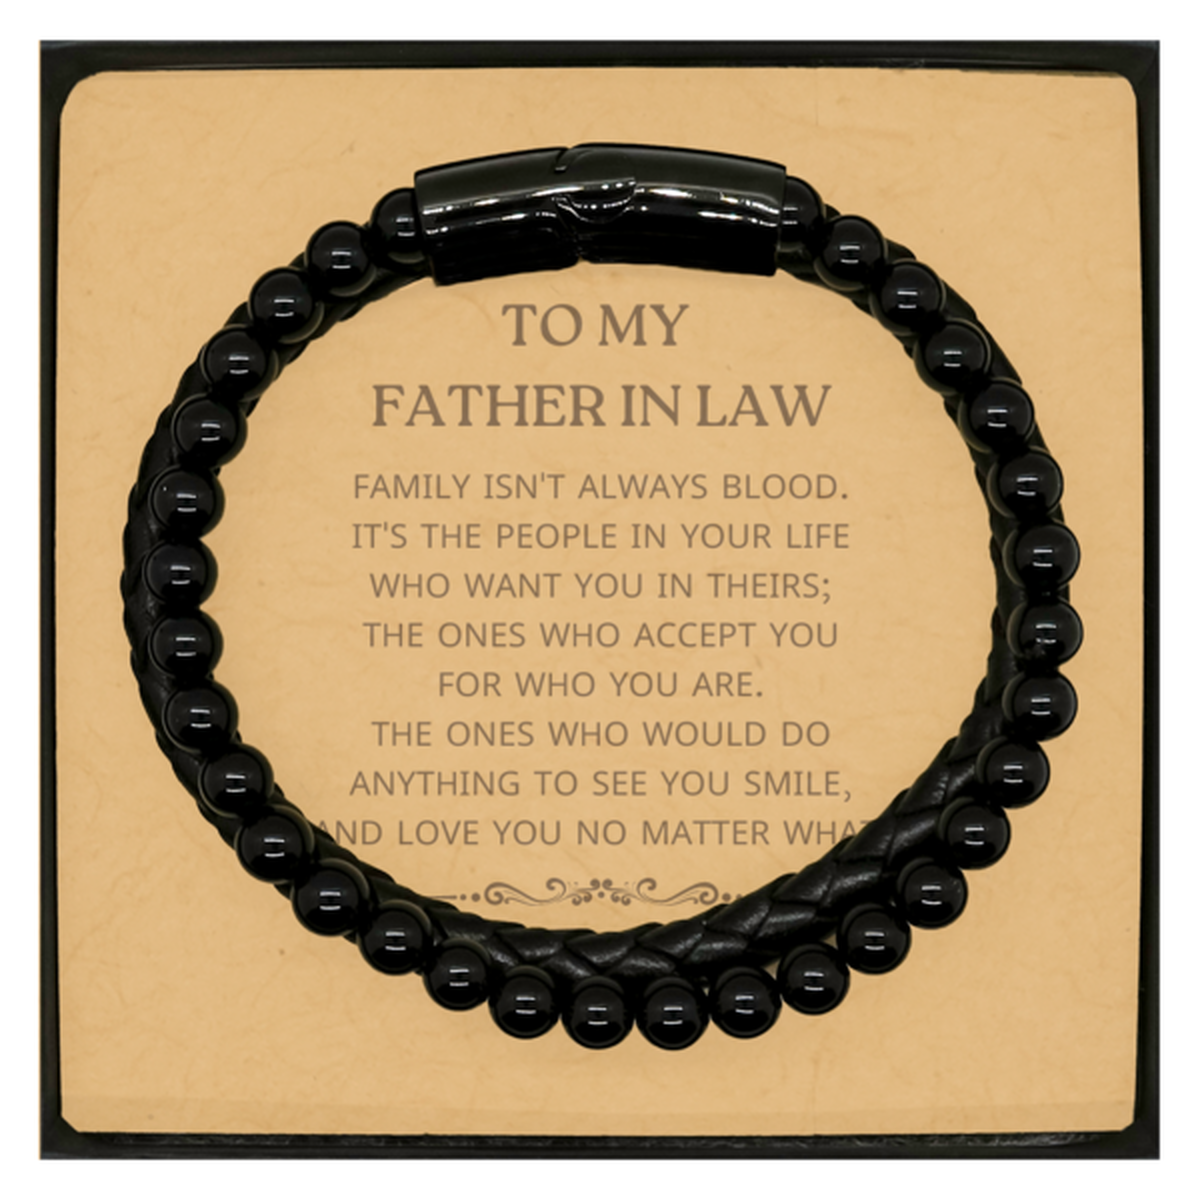 To My Father In Law Gifts, Family isn't always blood, Father In Law Stone Leather Bracelets, Birthday Christmas Unique Present For Father In Law